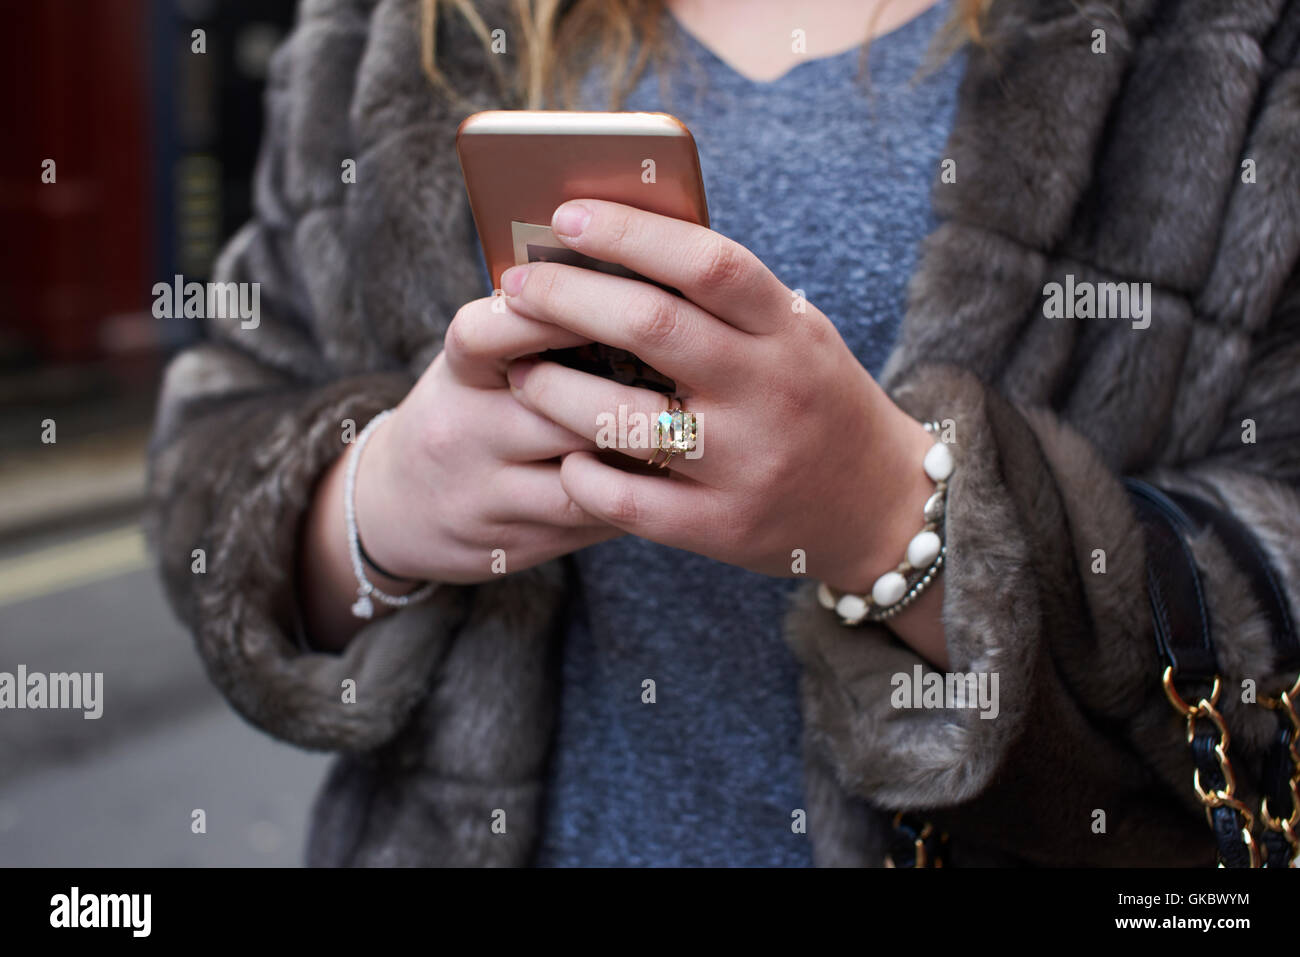 Mid section detail of woman using a smartphone in the street Stock Photo